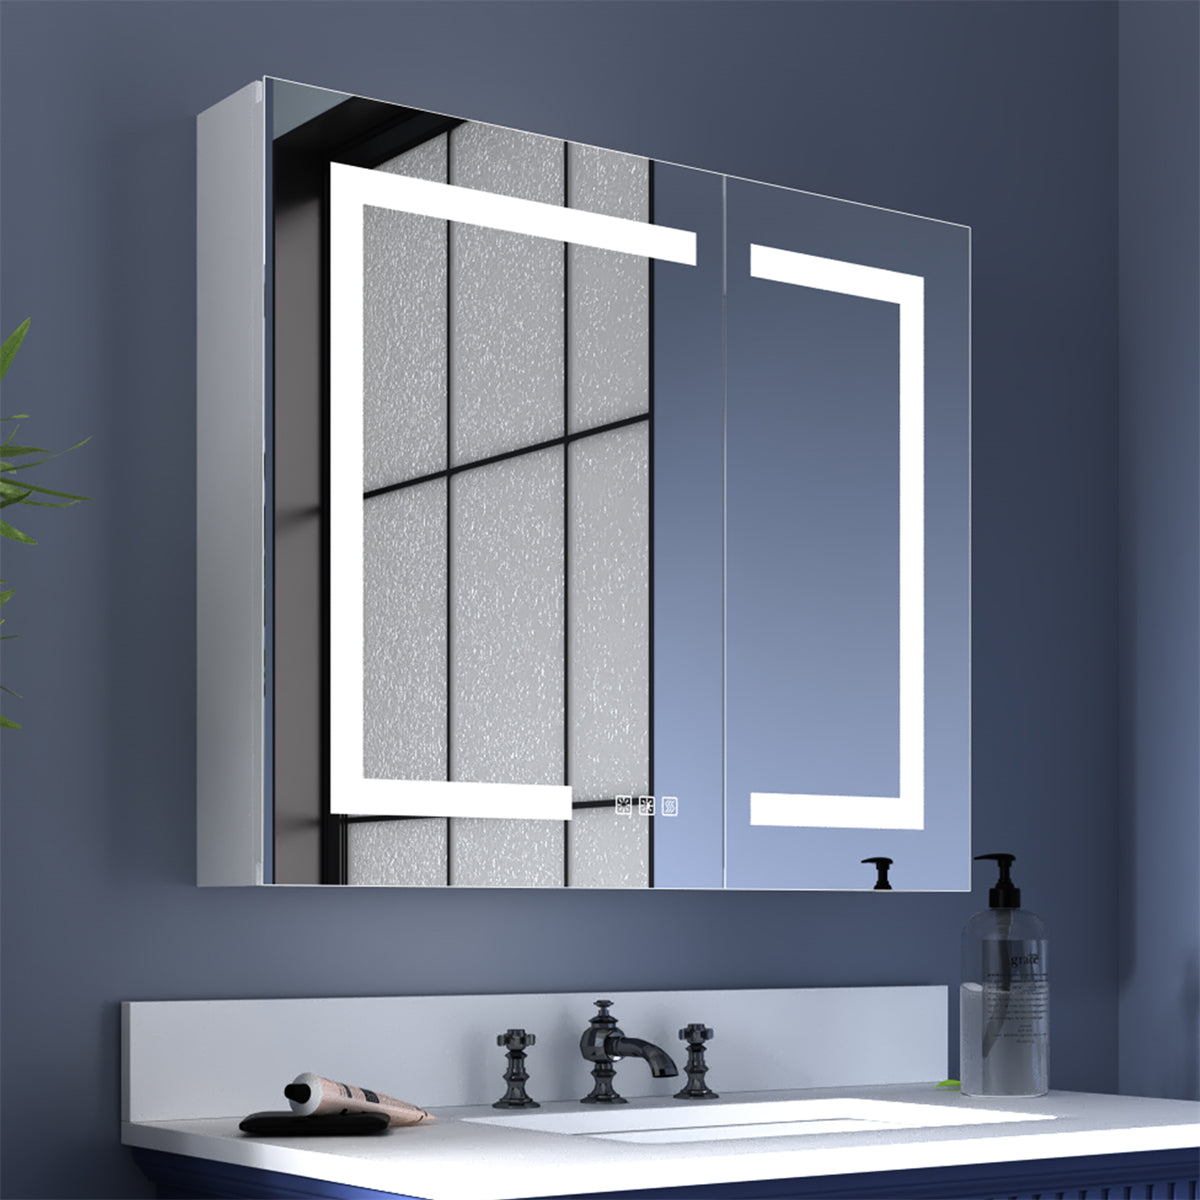 ExBrite 30 x 26 inch Bathroom Medicine Cabinet with Mirror And Light Recessed or Surface Mount